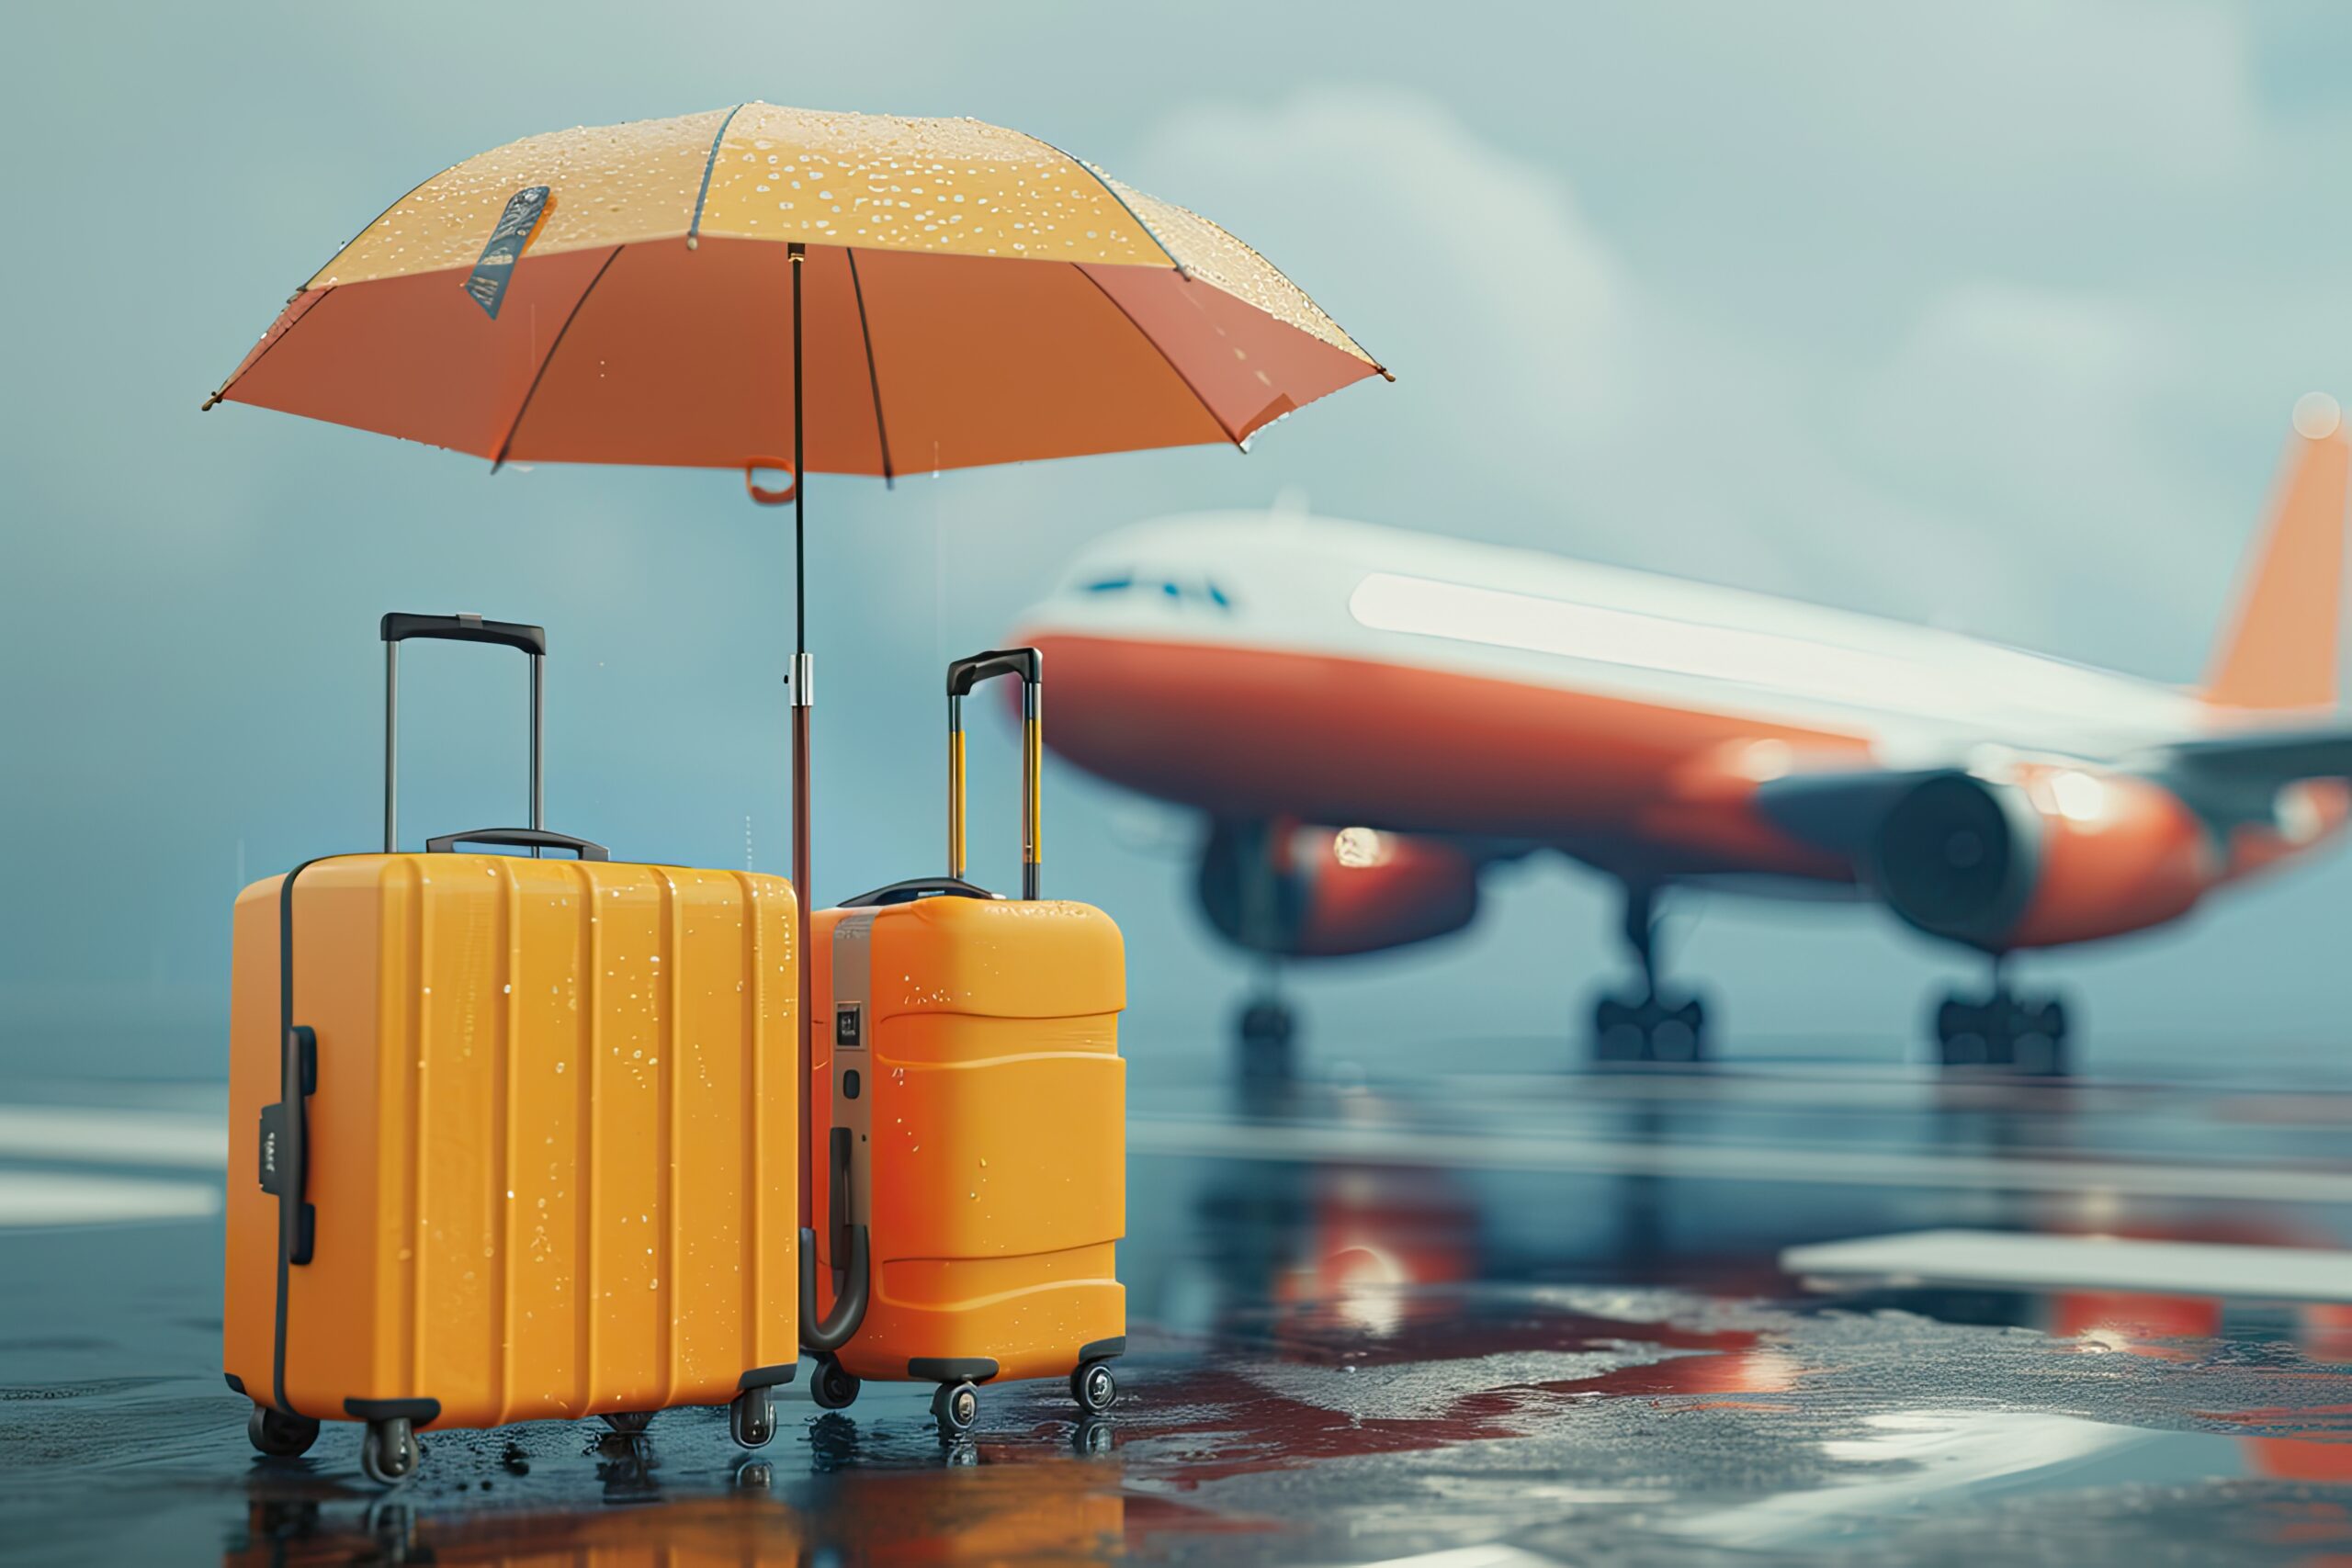 suitcase-airport-runway-plane-background-travel-concept